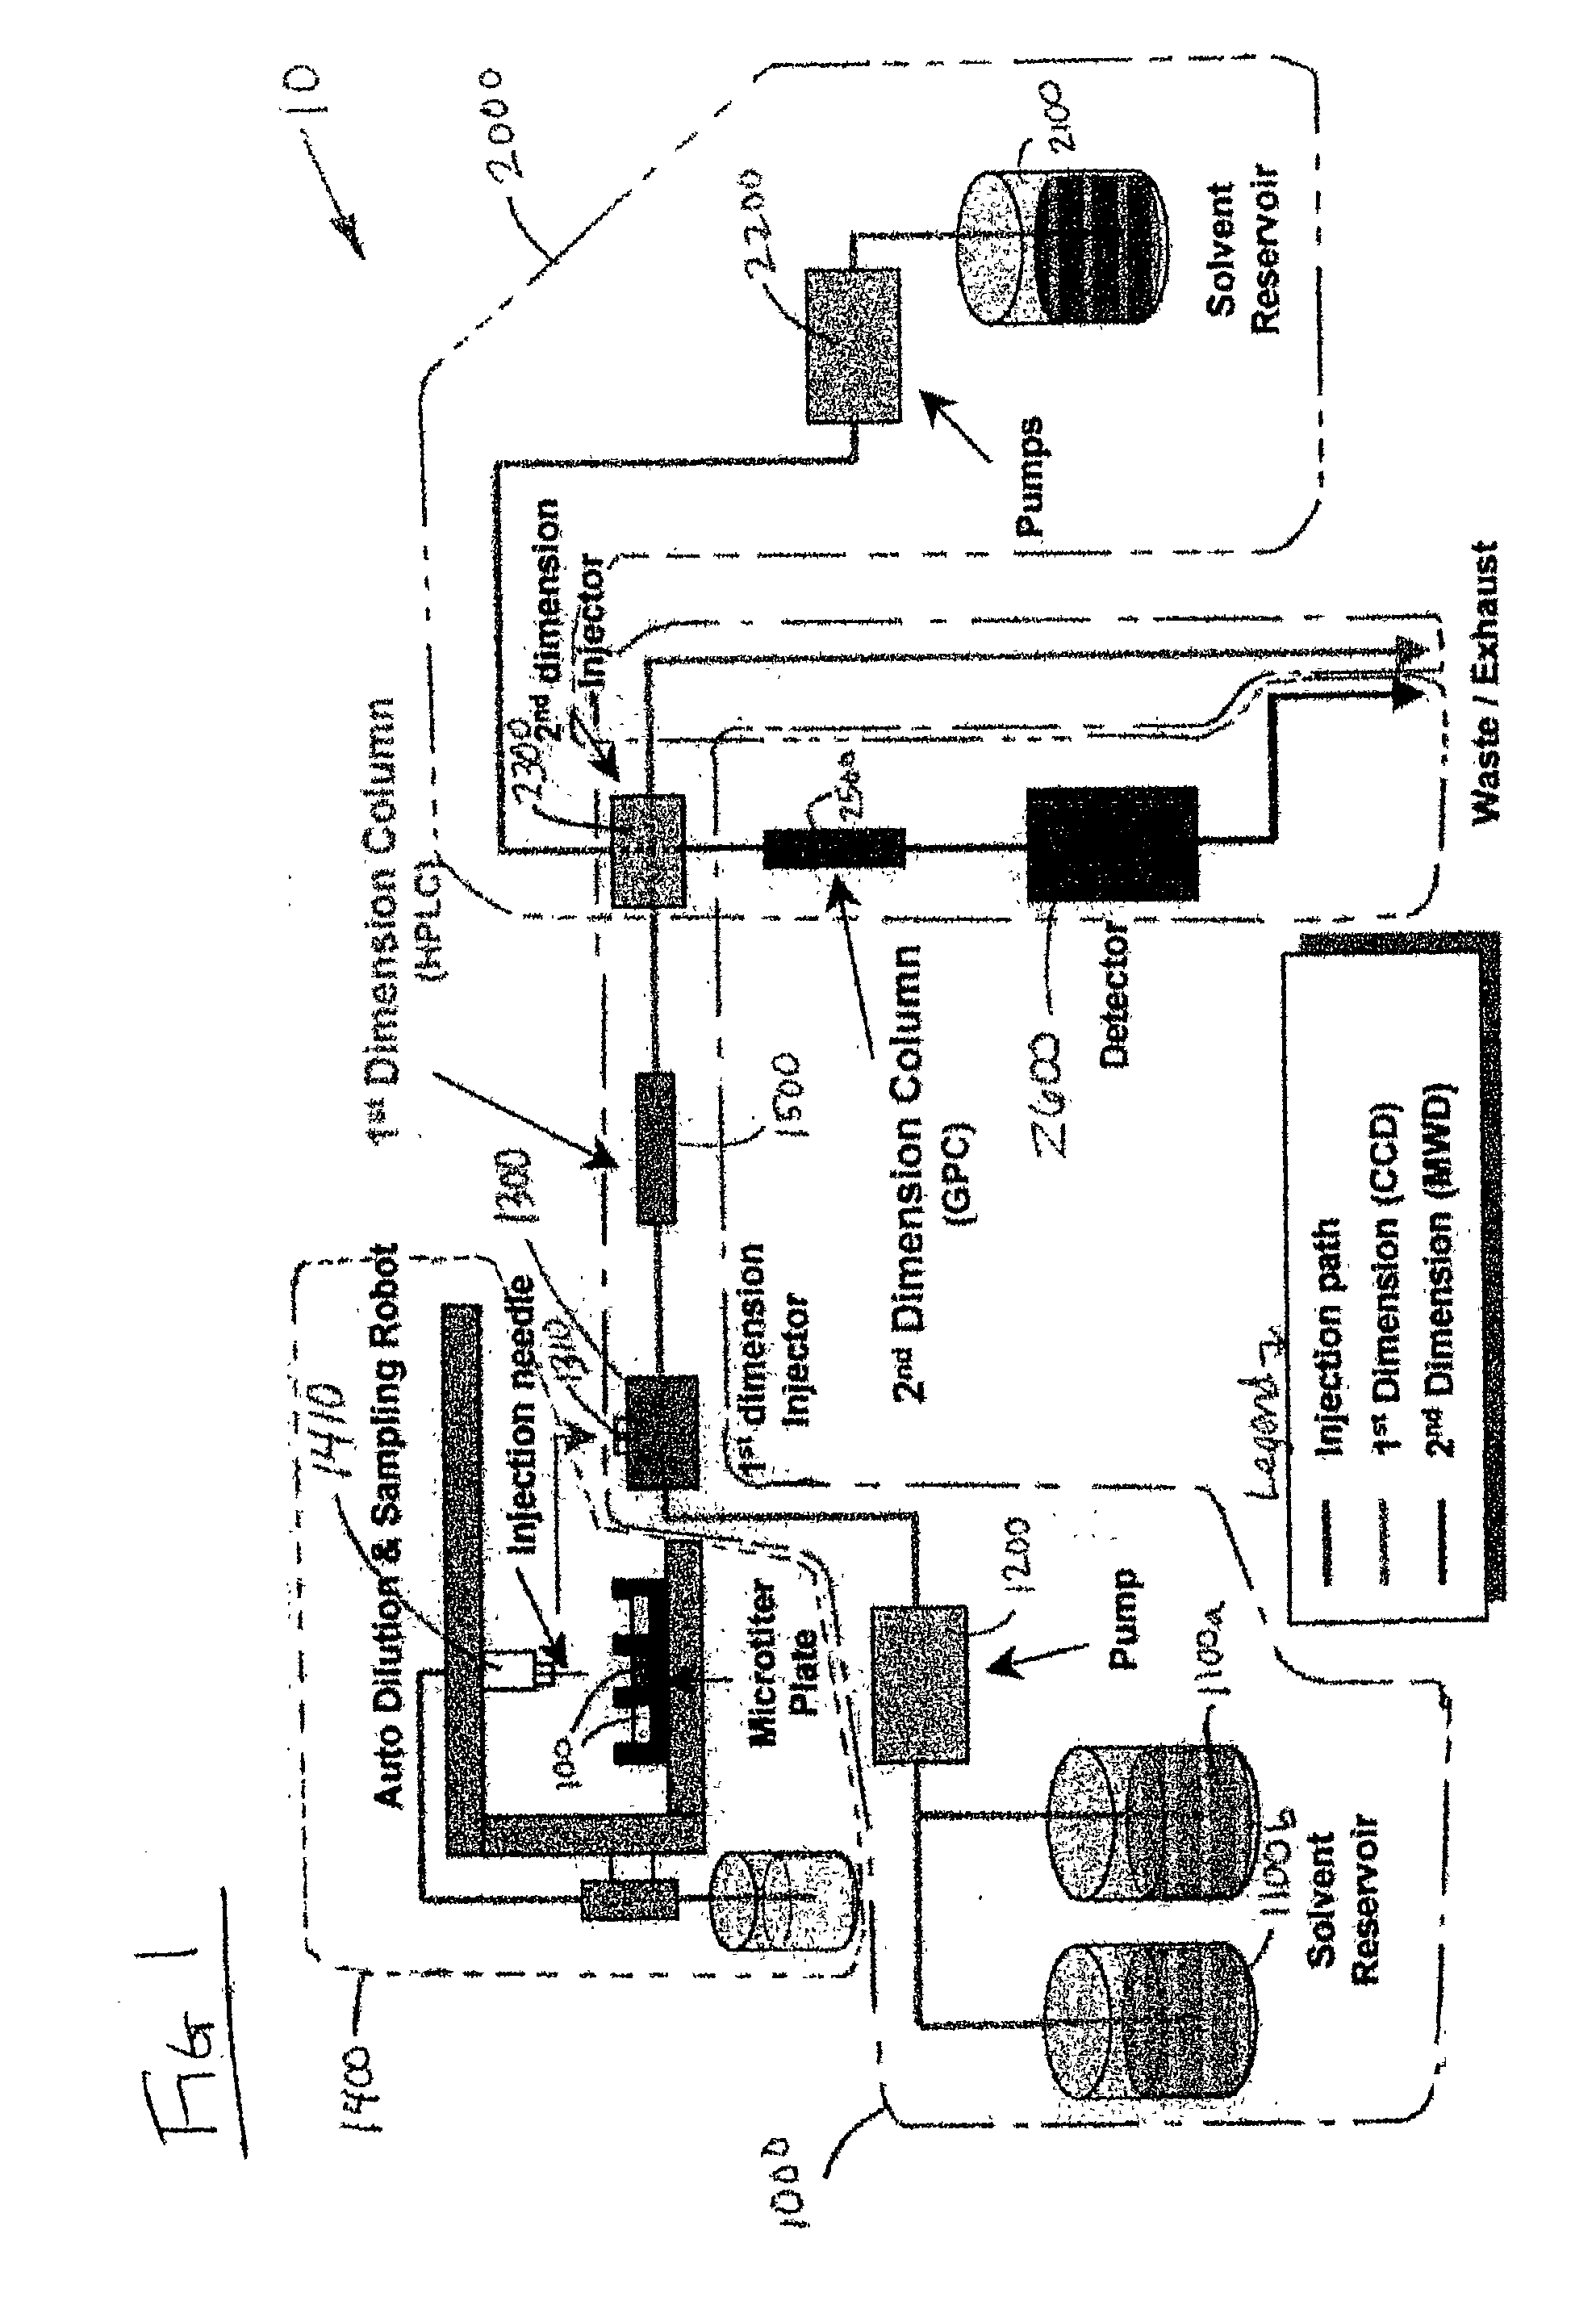 Methods and apparatus for characterization of polymers using multi-dimensional liquid chromatography with parallel second-dimension sampling